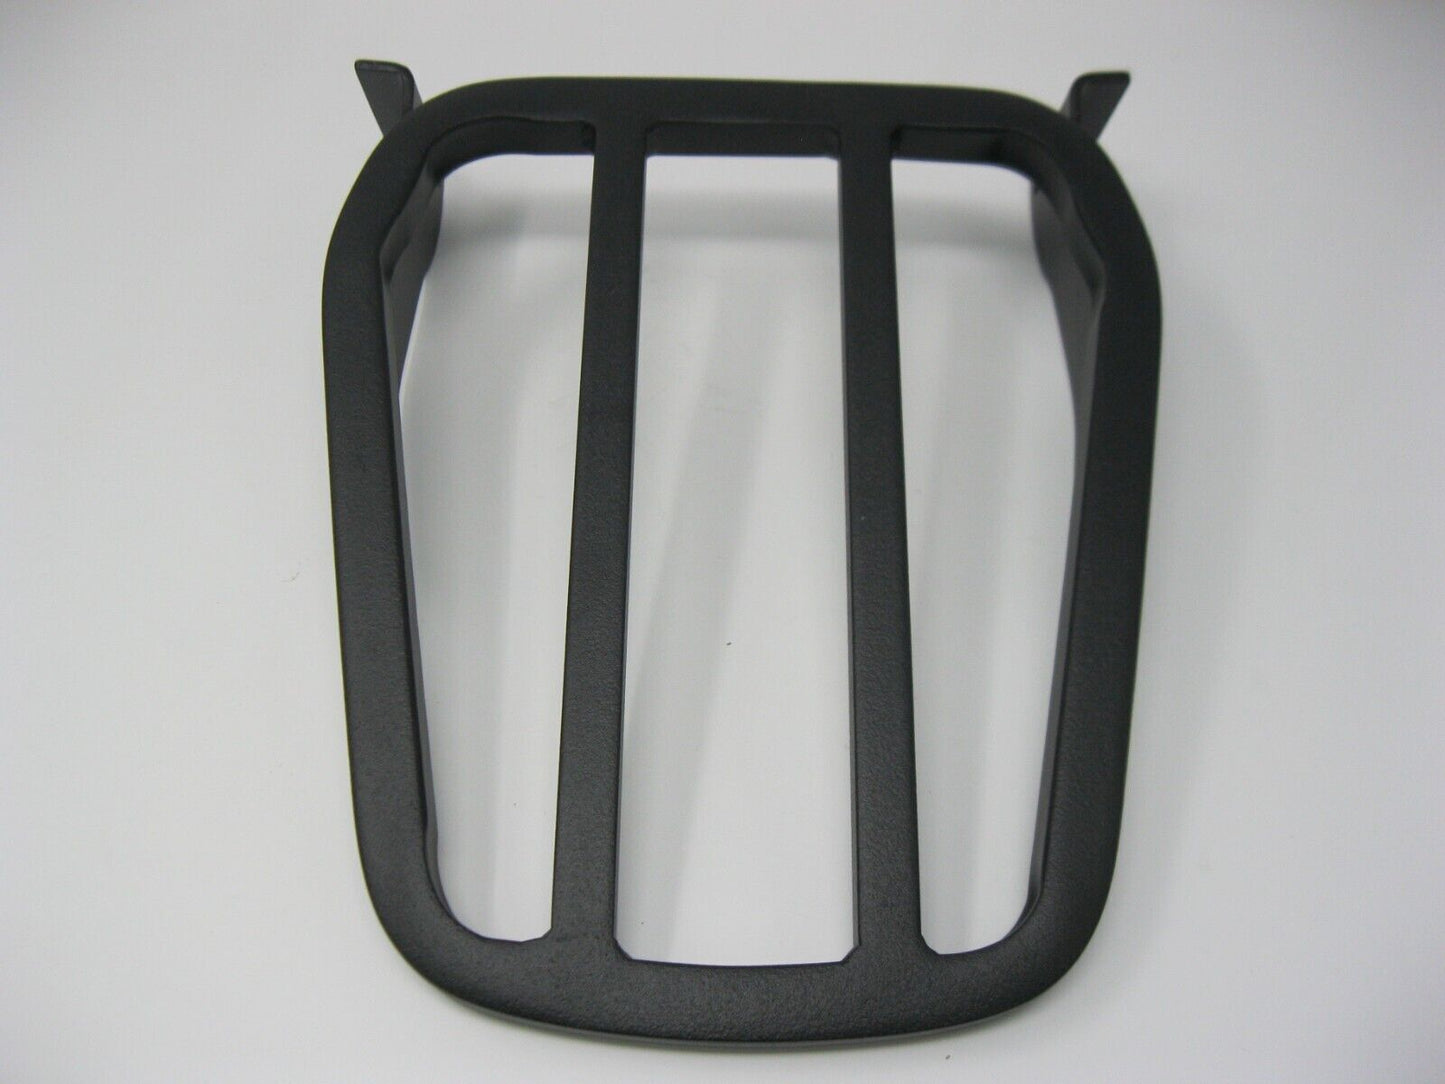 Sissy Bar Mounted Black Luggage Rack for 7.5" Wide Uprights